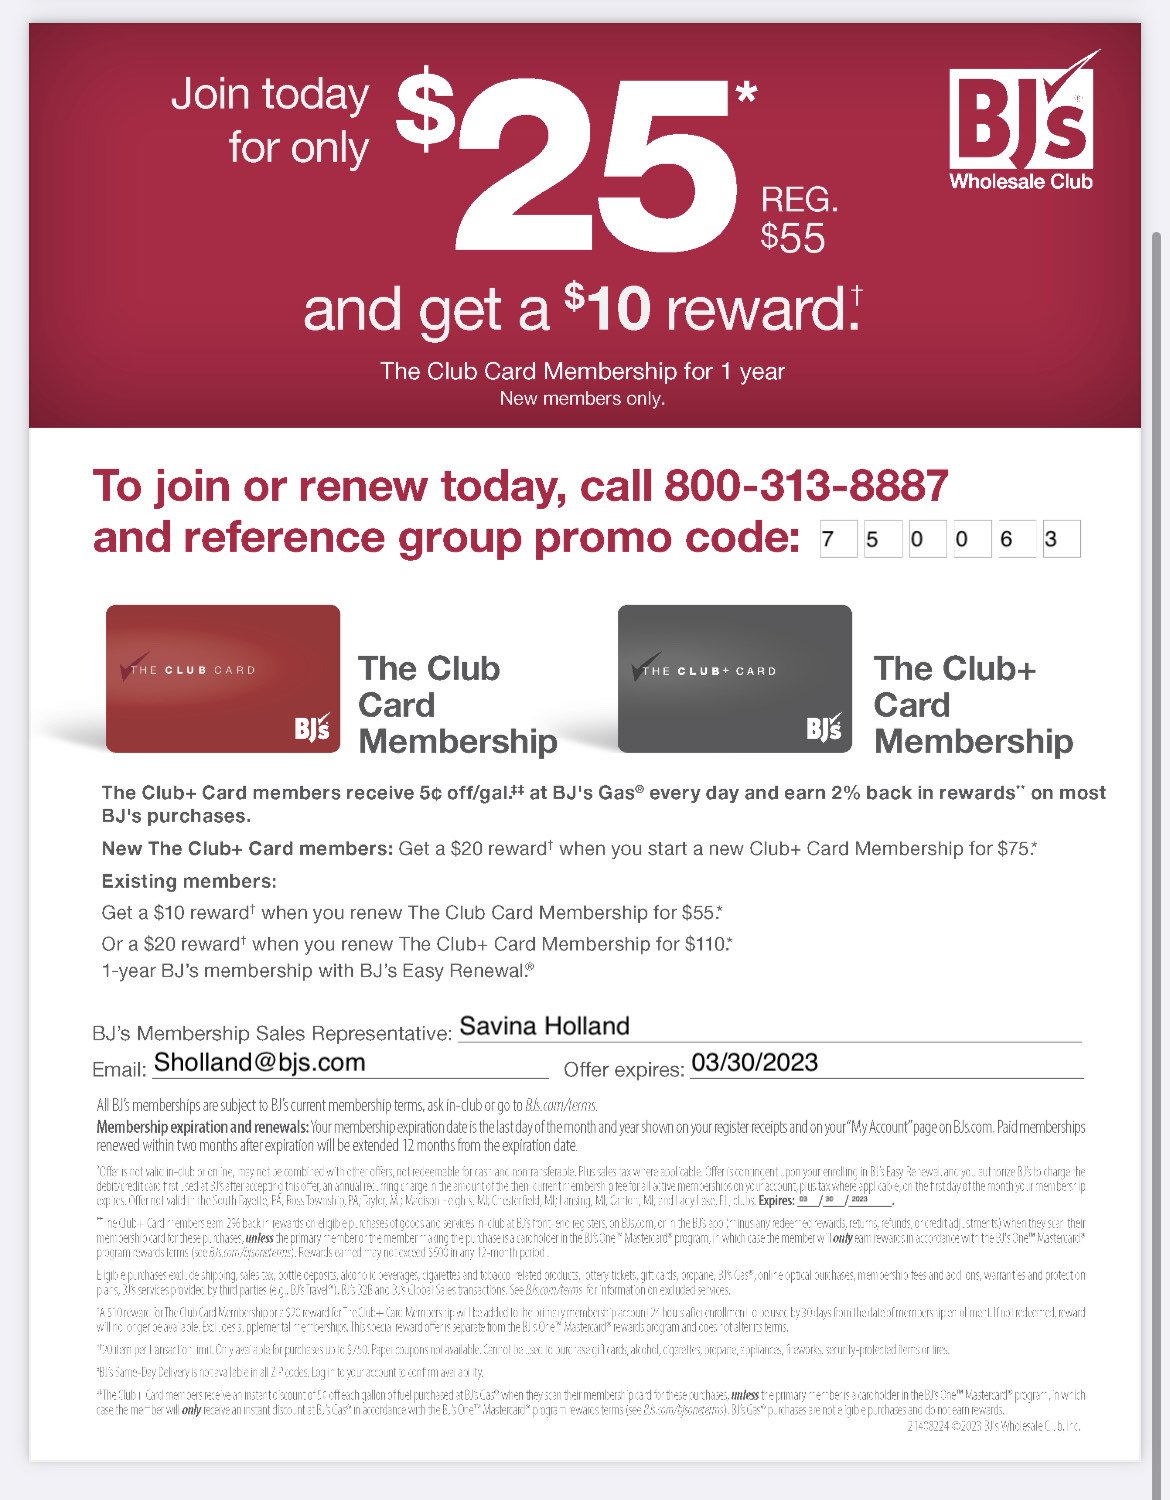 BJ's Club for a Cause: Join or Renew by 3/30/23 for $25 and up to